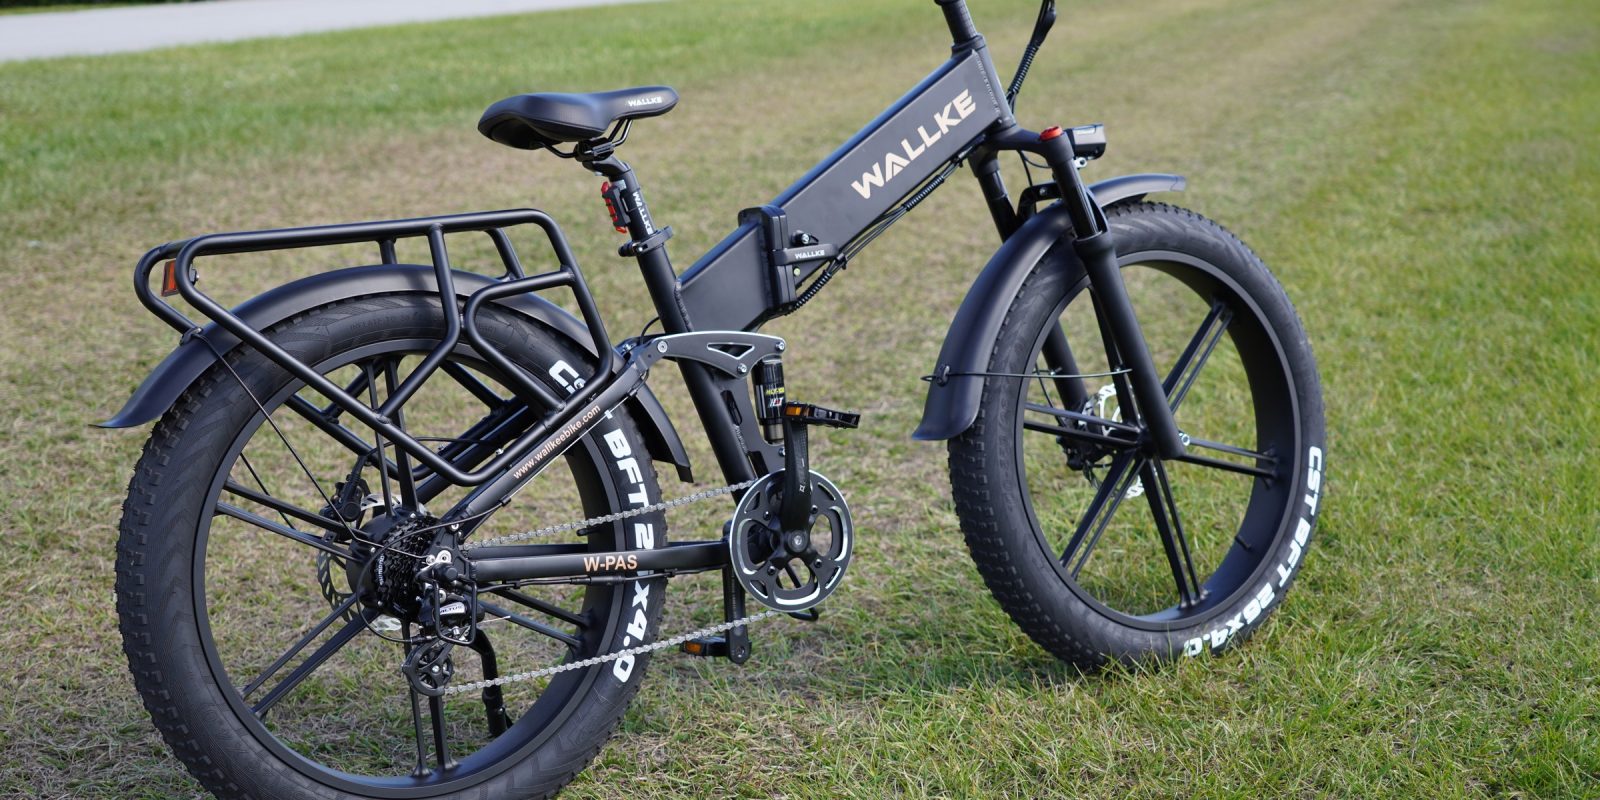 Wallke X2 Pro review: This full-suspension fat tire e-bike folds in half!